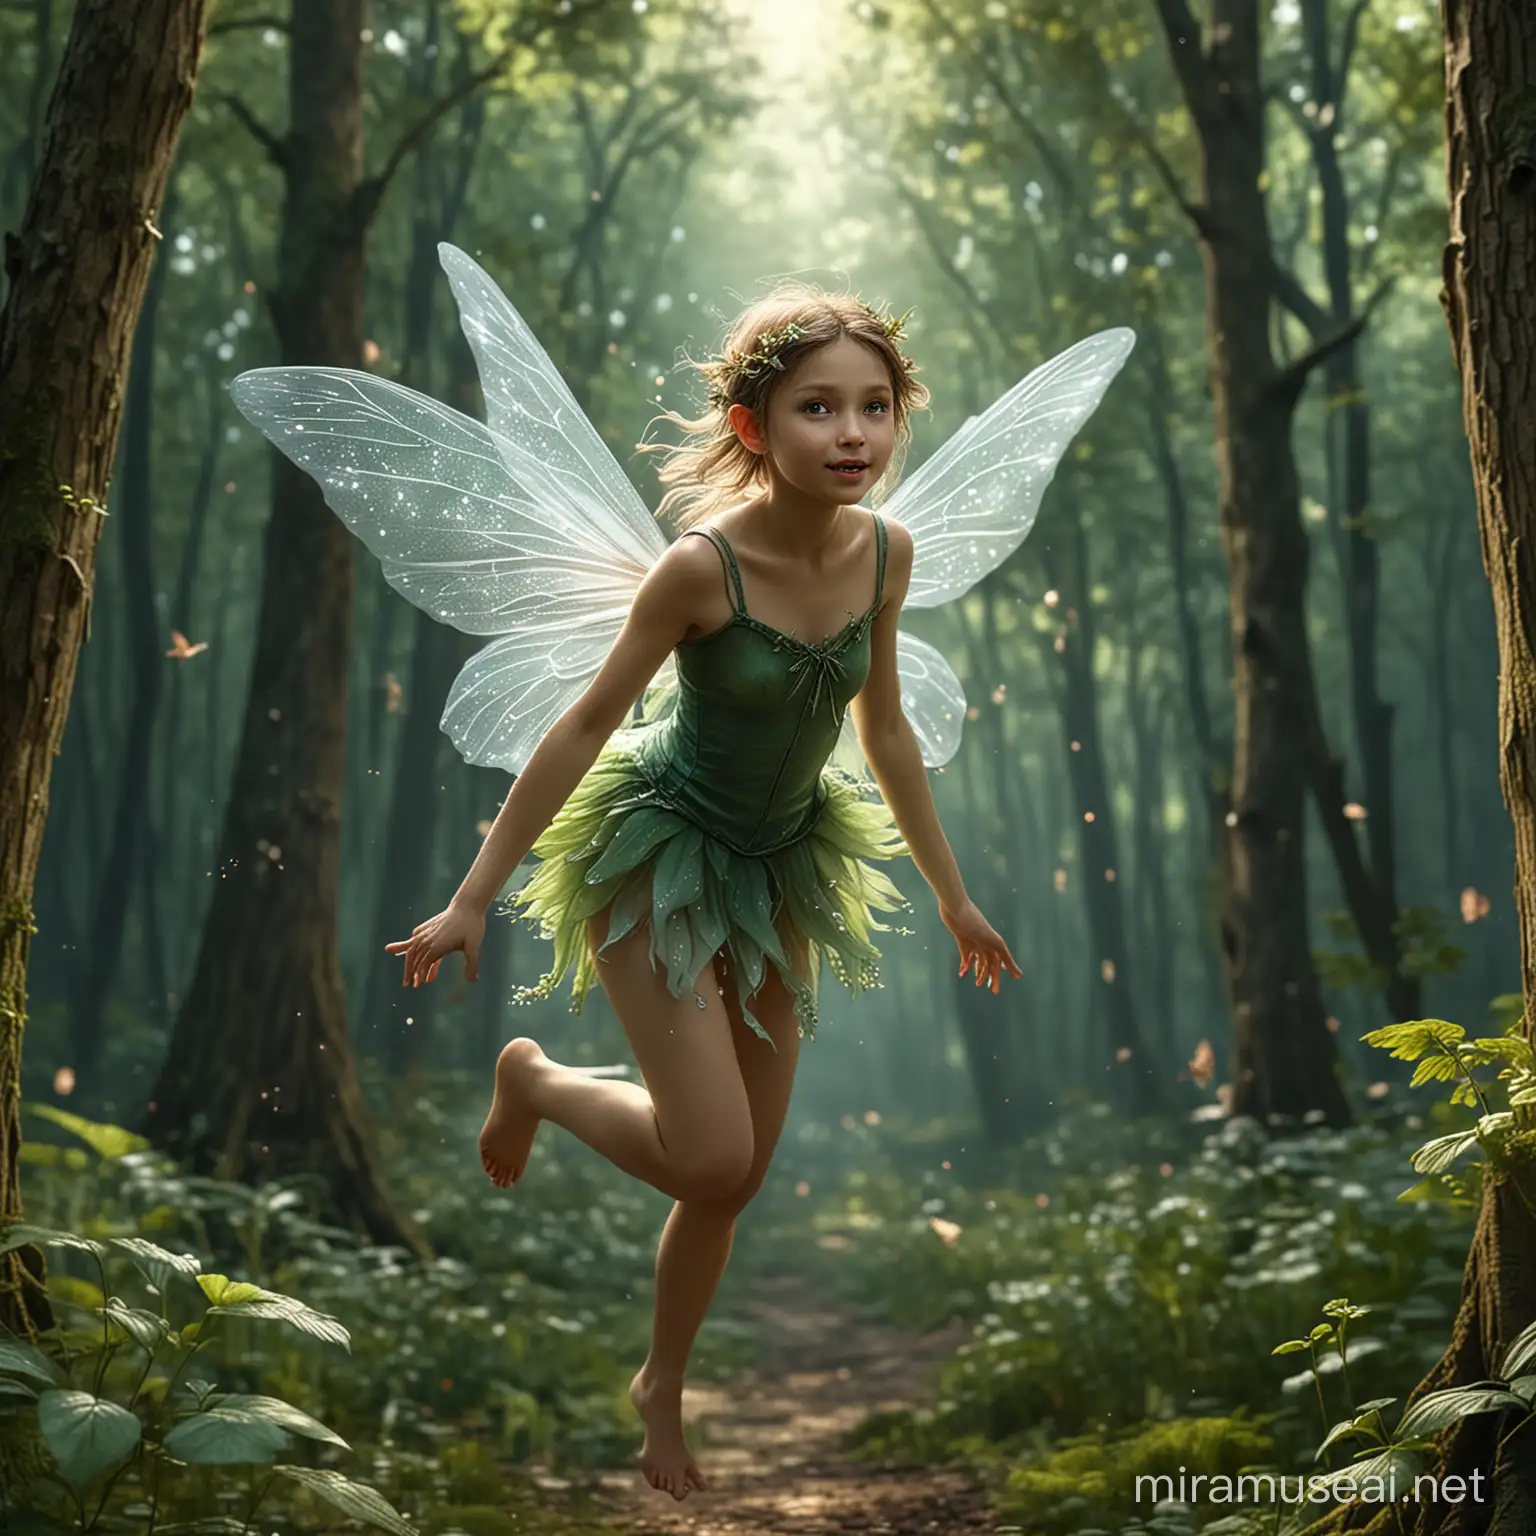 Enchanting Realistic Fairy Soaring Through a Lush Forest